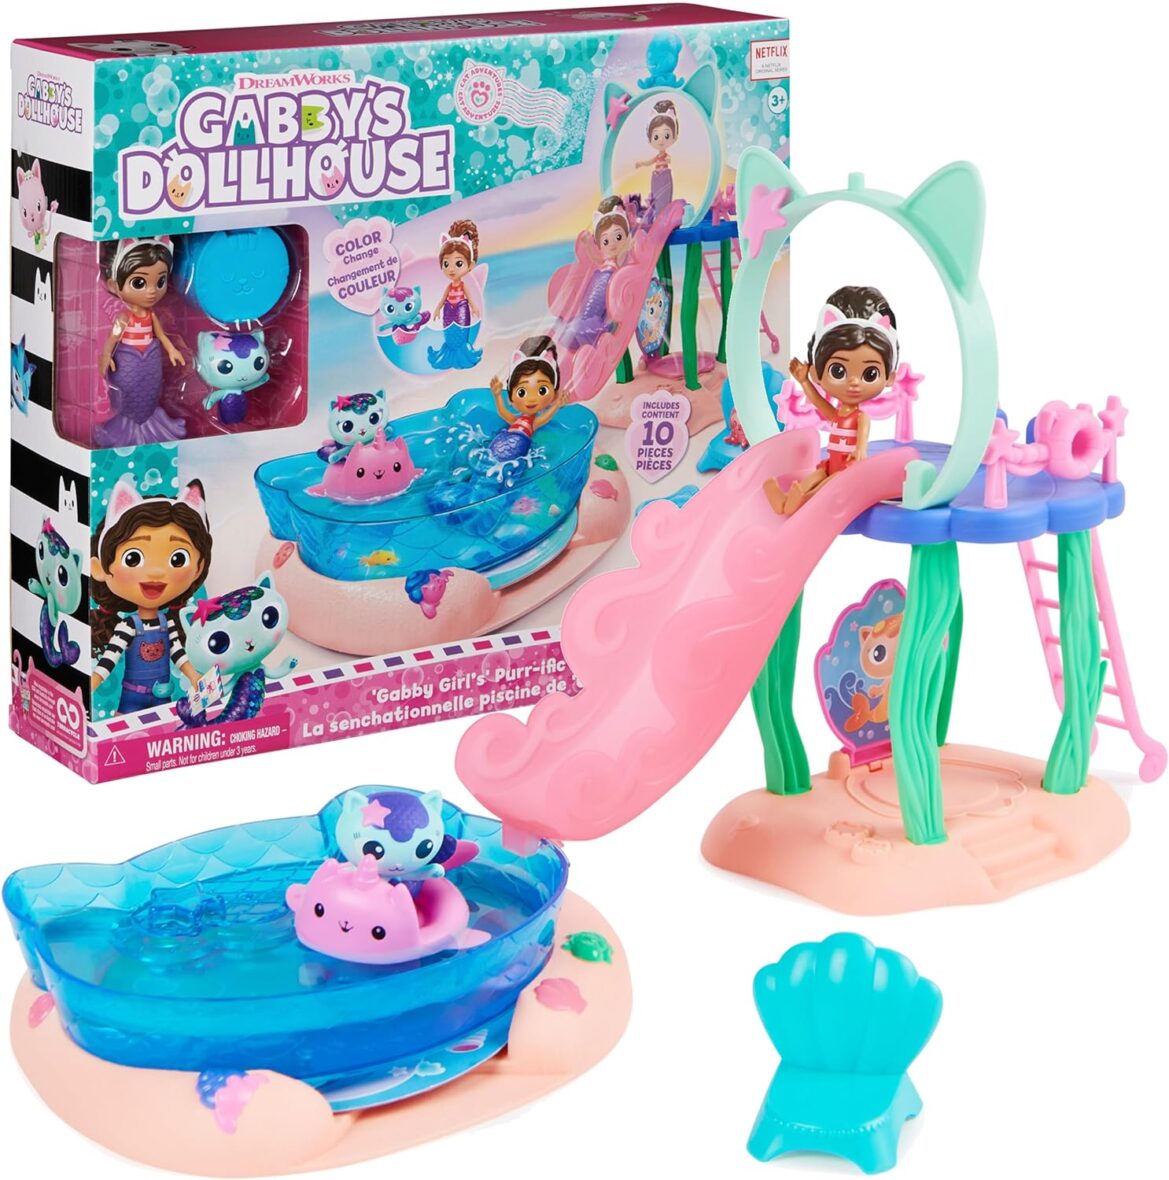 Gabby’s Dollhouse, Purr-ific Pool Playset with Gabby and MerCat Figures, Color-Changing Mermaid Tails and Pool Accessories